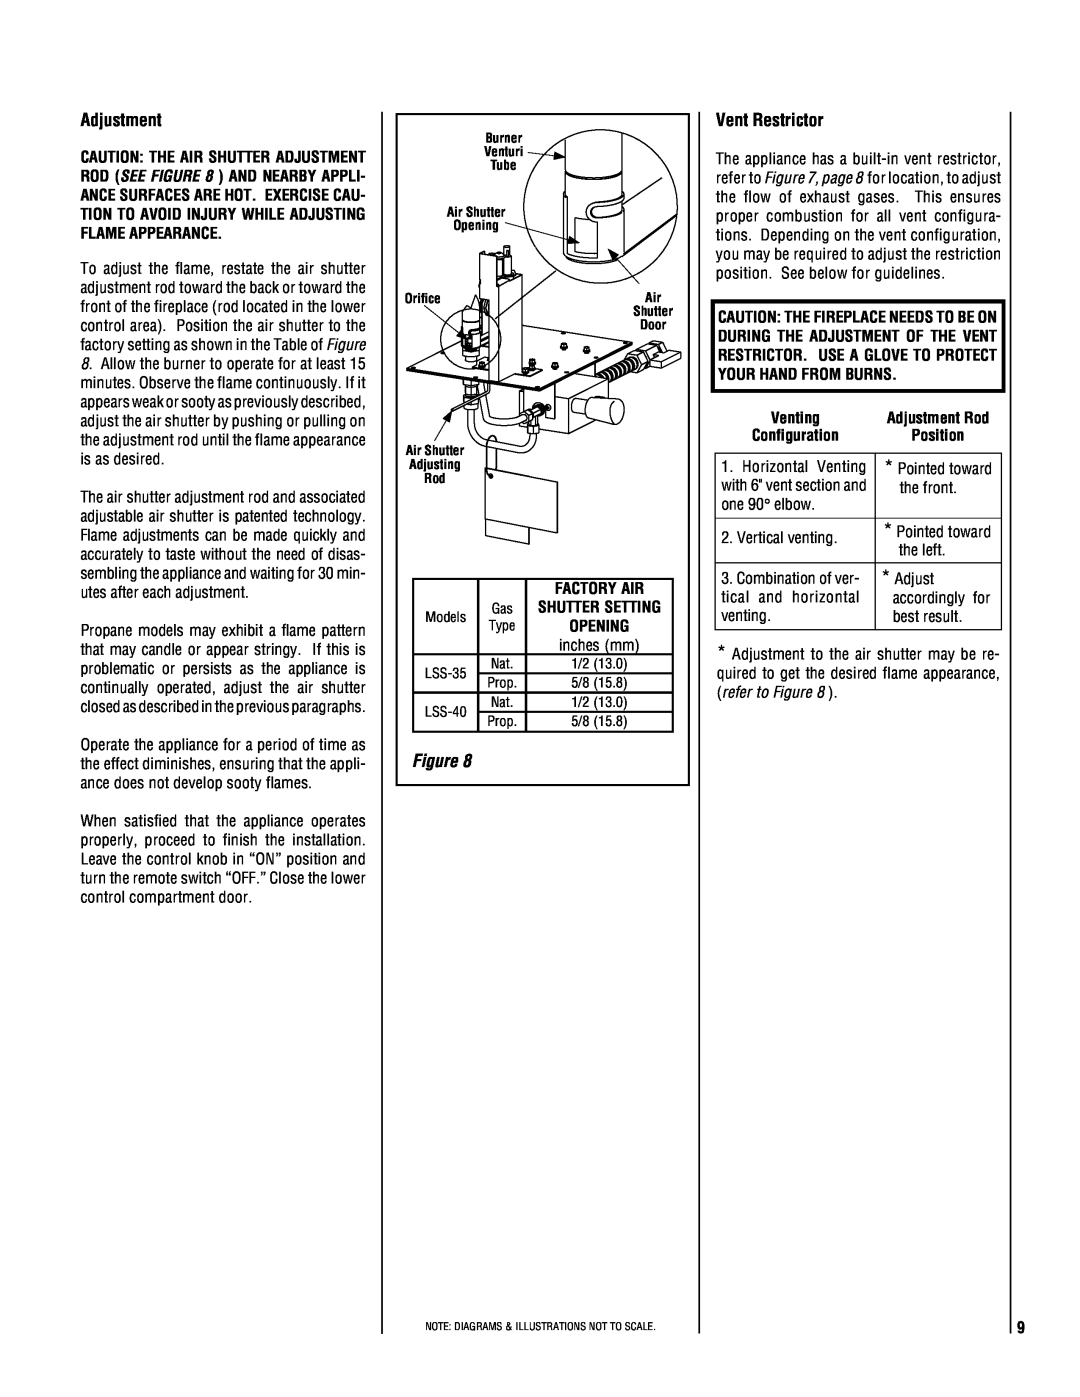 Magnavox LSS-40CP manual Adjustment, Vent Restrictor, Factory Air, Venting, Configuration 